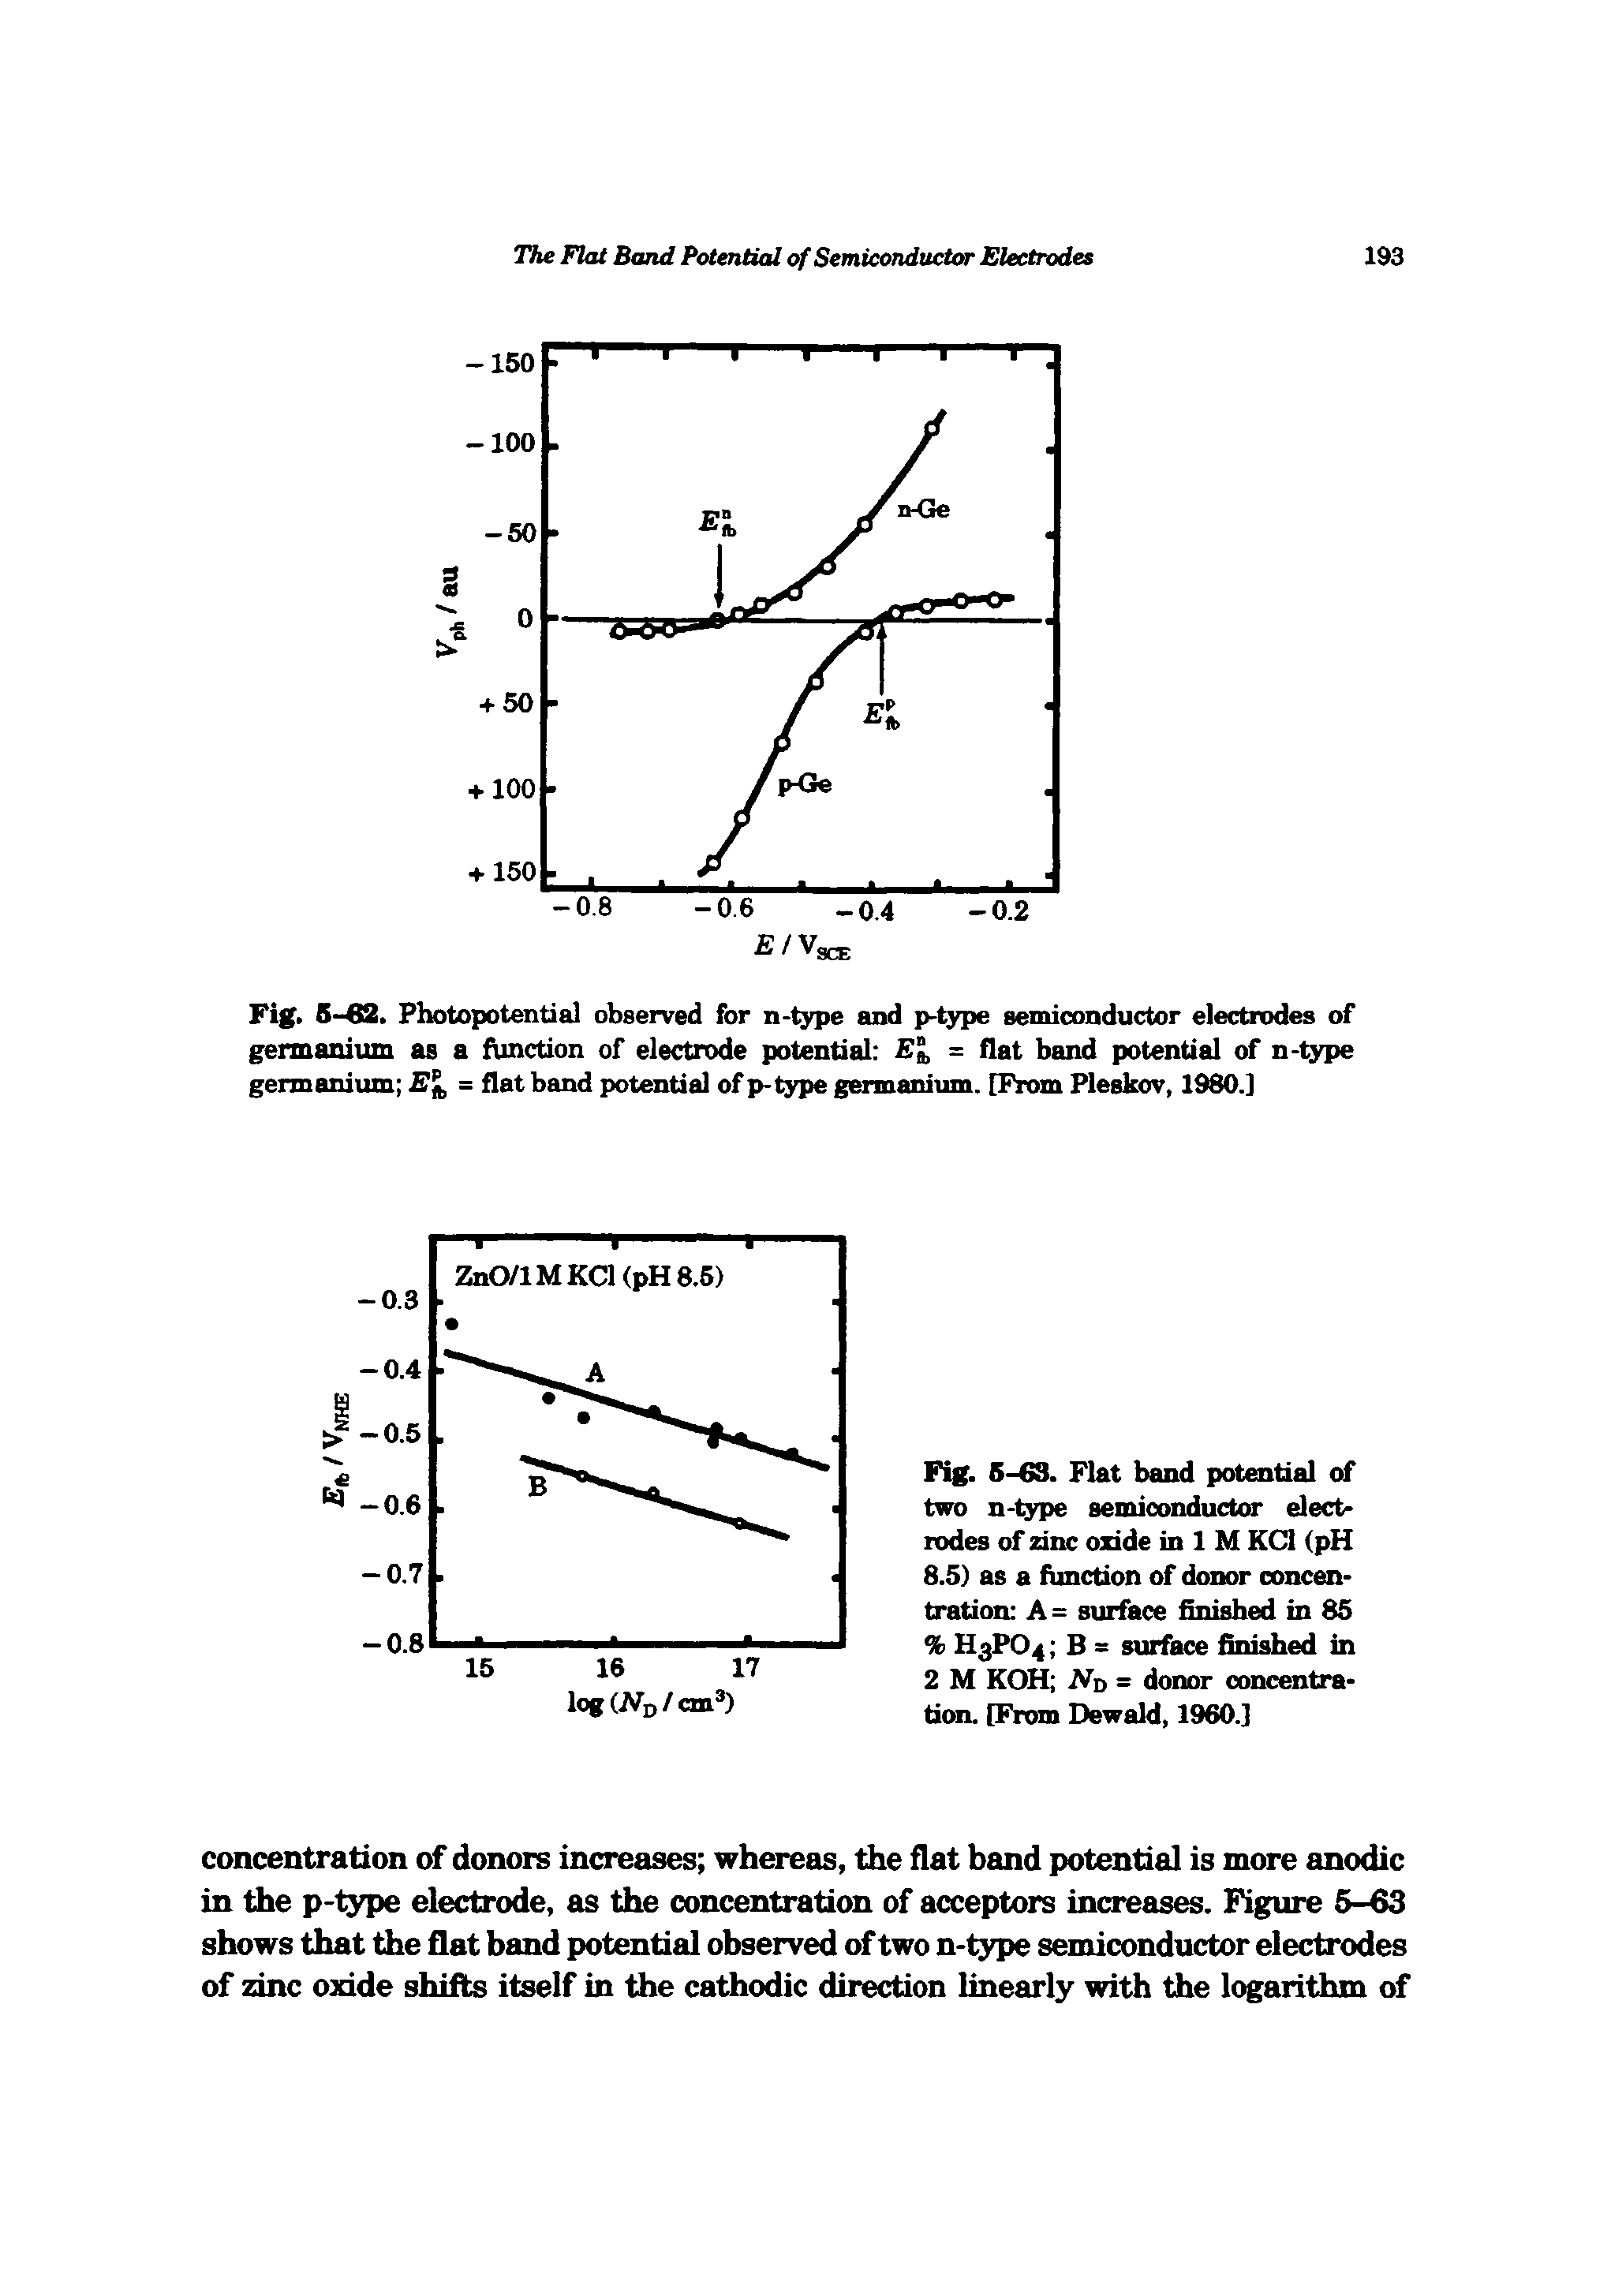 Fig. S-. Photopotentia] observed for n-fype and p-fype semiconductor electrodes of germanium as a function of electrode potential El, = flat band potential of n-type germanium band potential of p-type germanium. [From Pleskov, 1980.]...